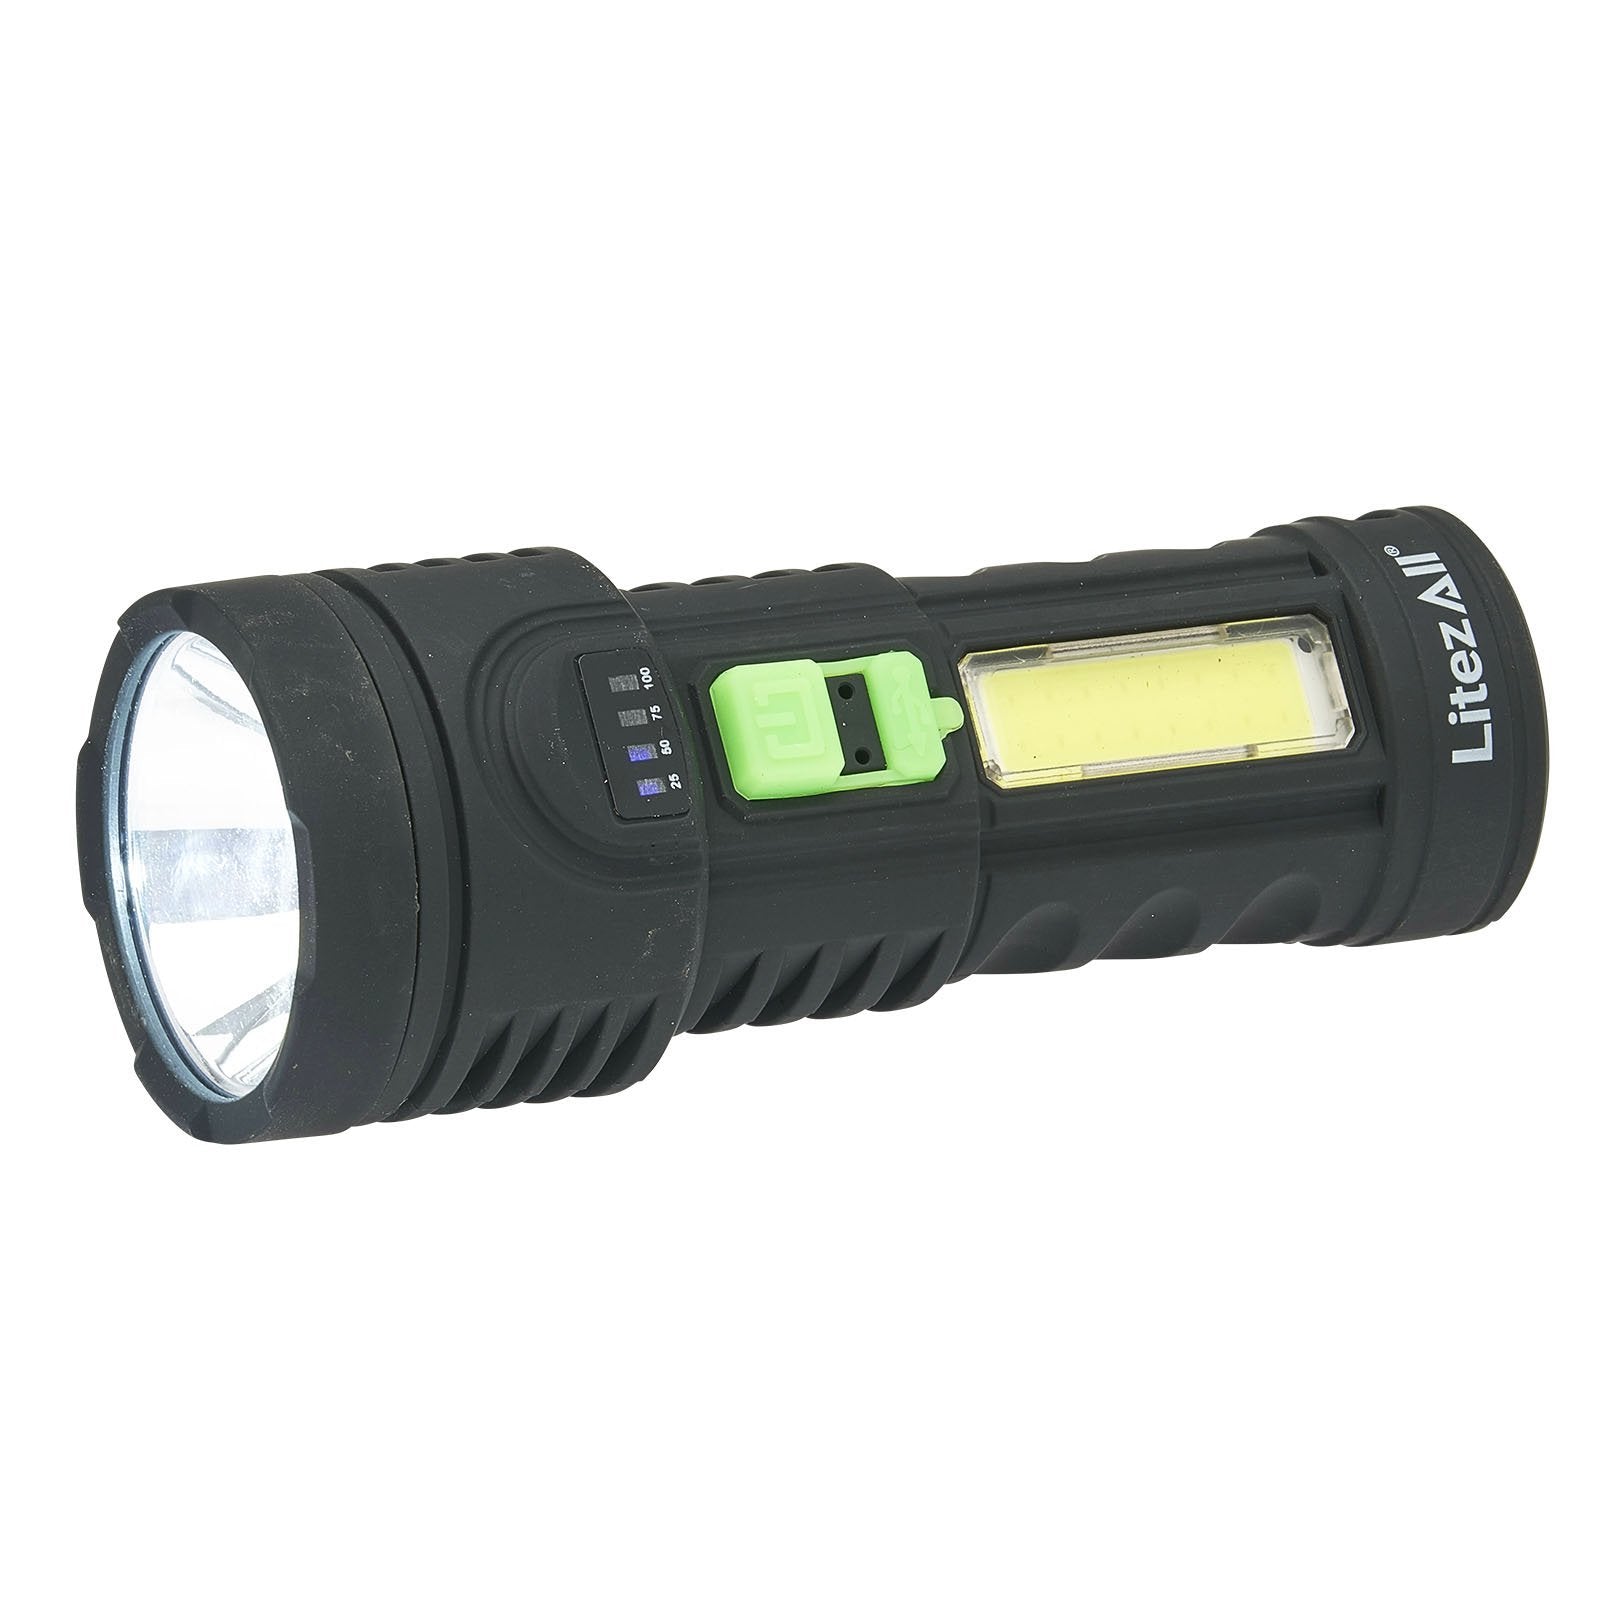 LitezAll TPR Coated Rechargeable Flashlight with Work Light - LitezAll - Tactical Flashlights - 4